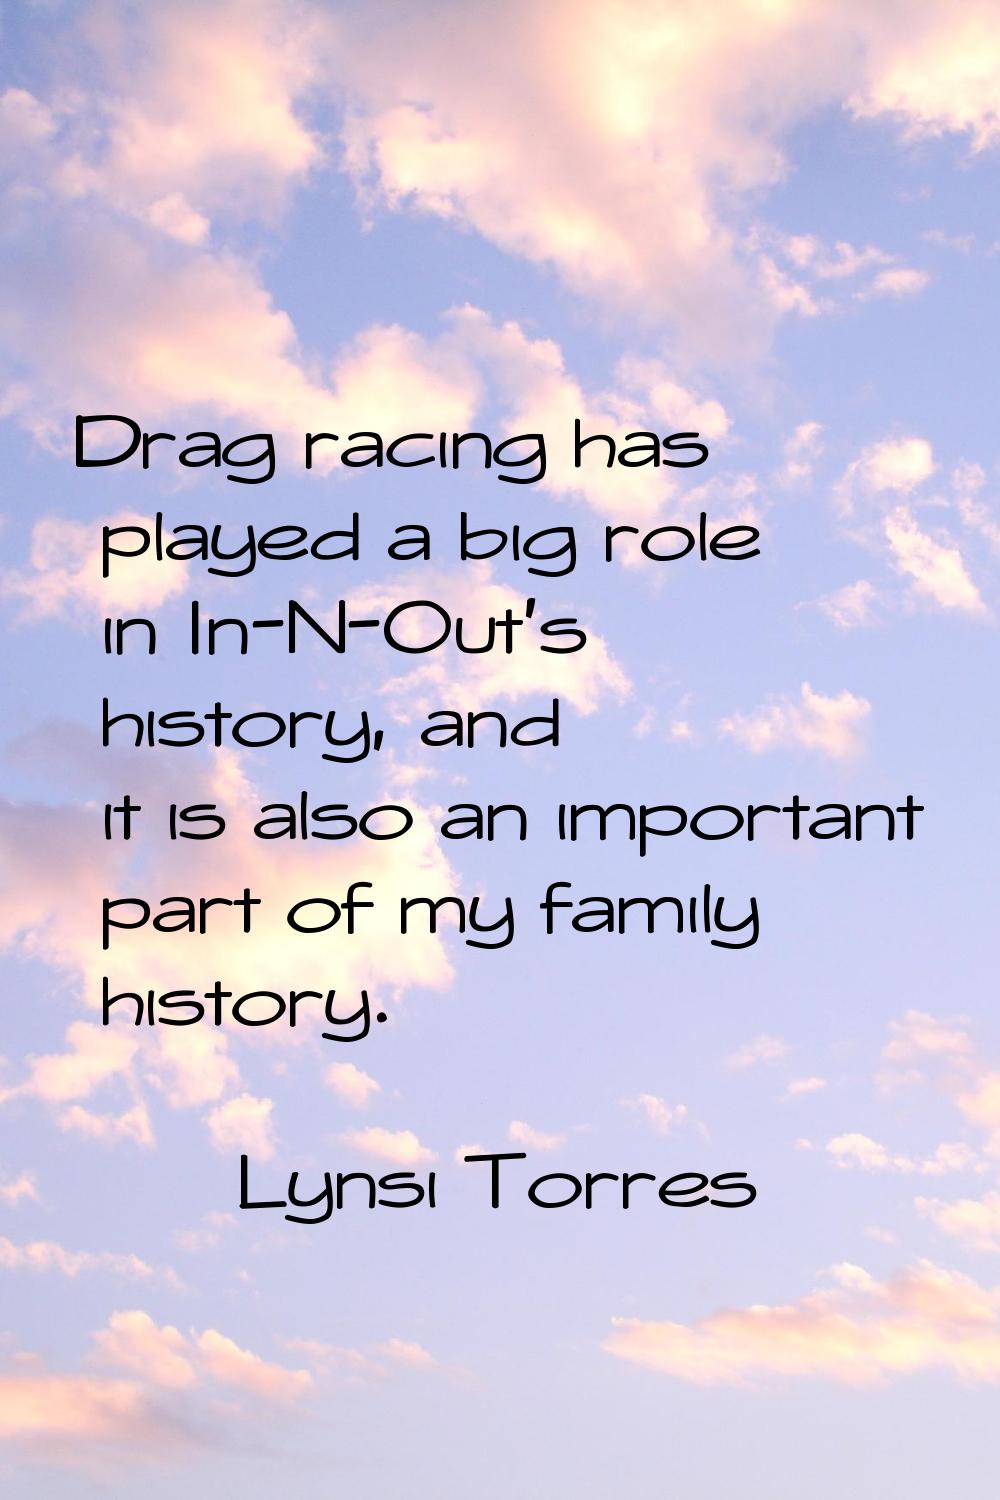 Drag racing has played a big role in In-N-Out's history, and it is also an important part of my fam